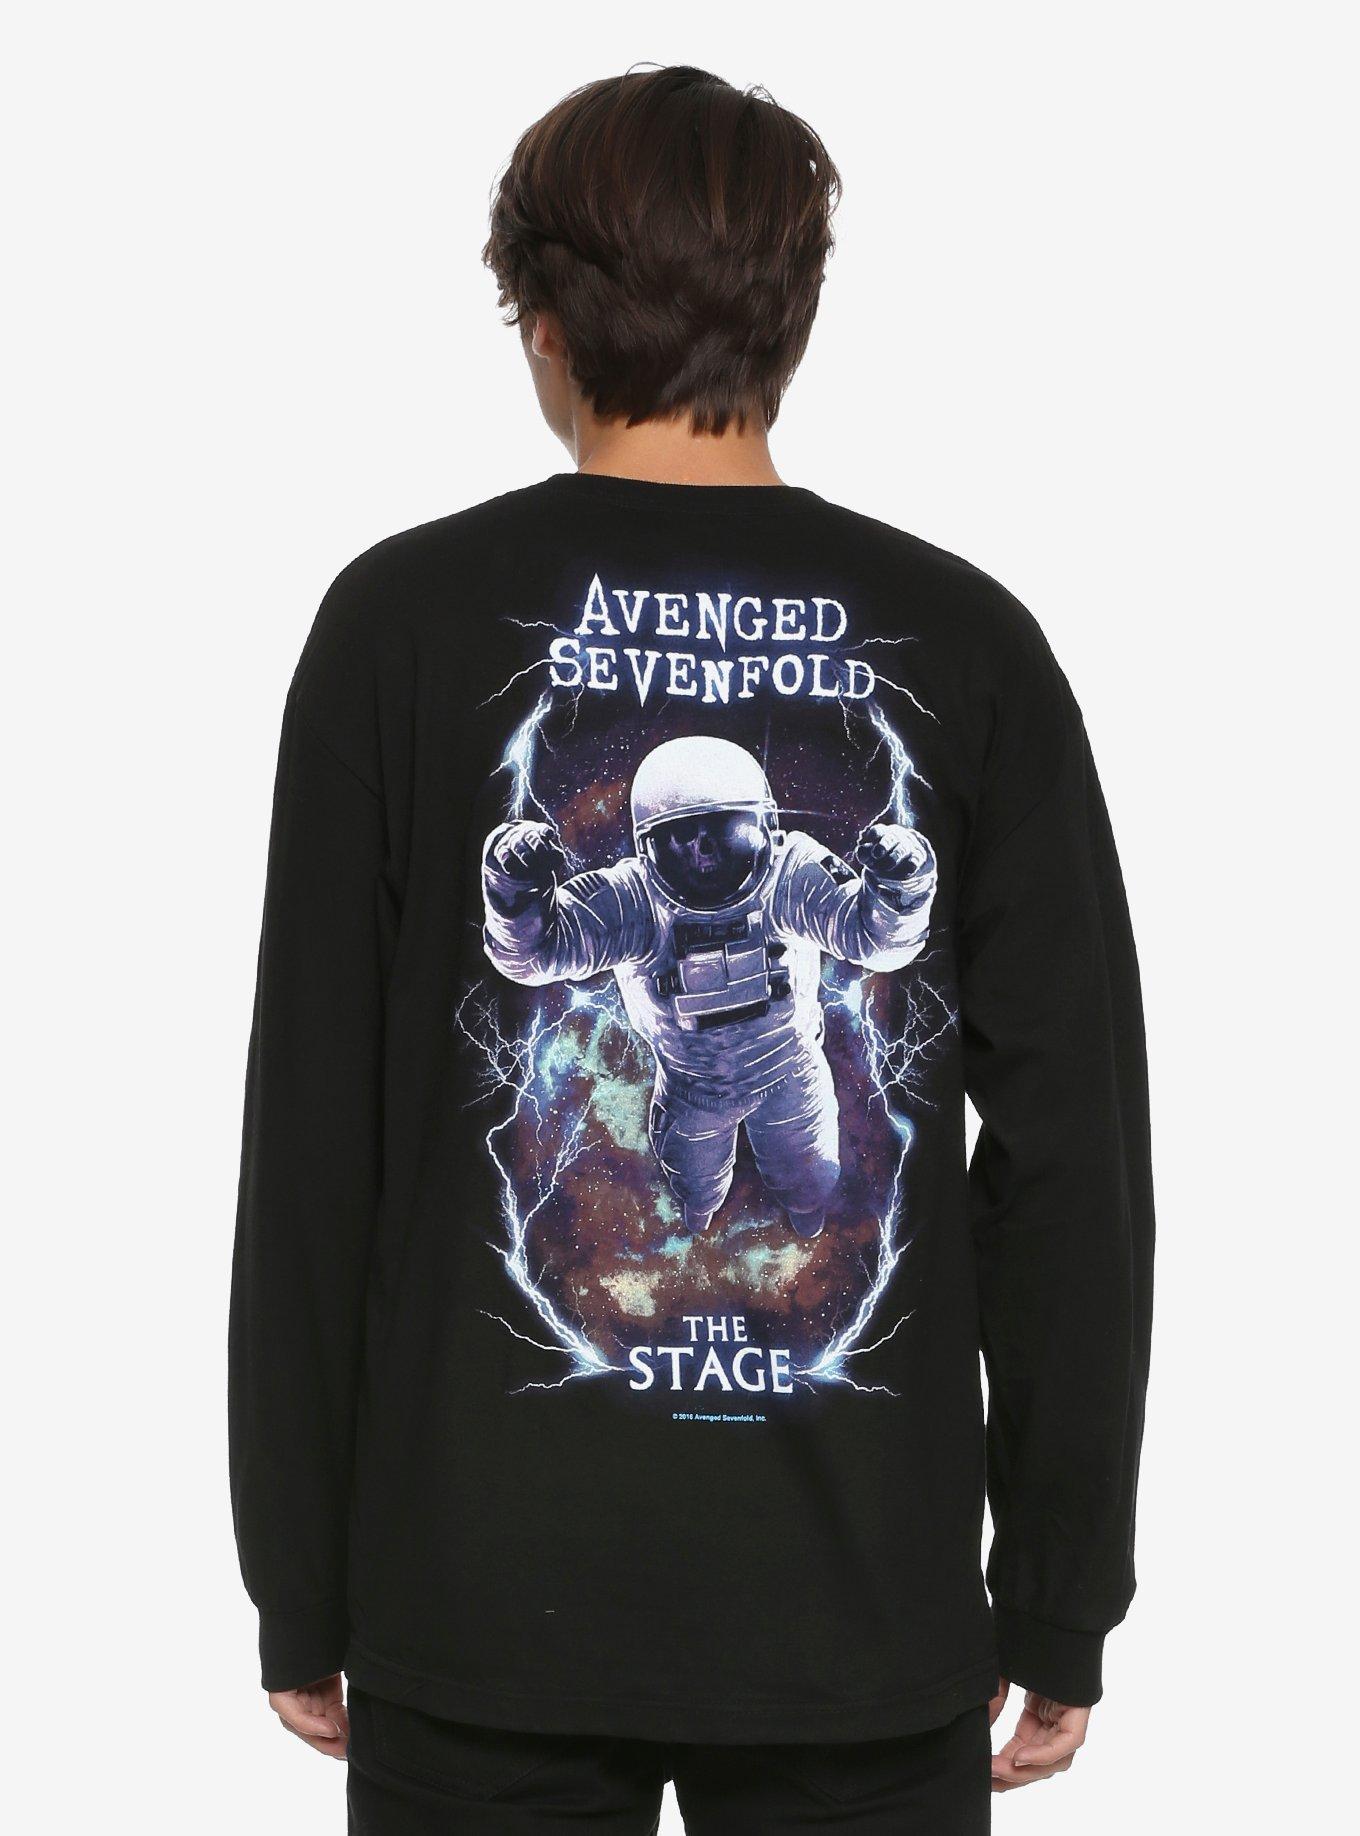 Avenged Sevenfold The Stage Long-Sleeve T-Shirt, BLACK, hi-res